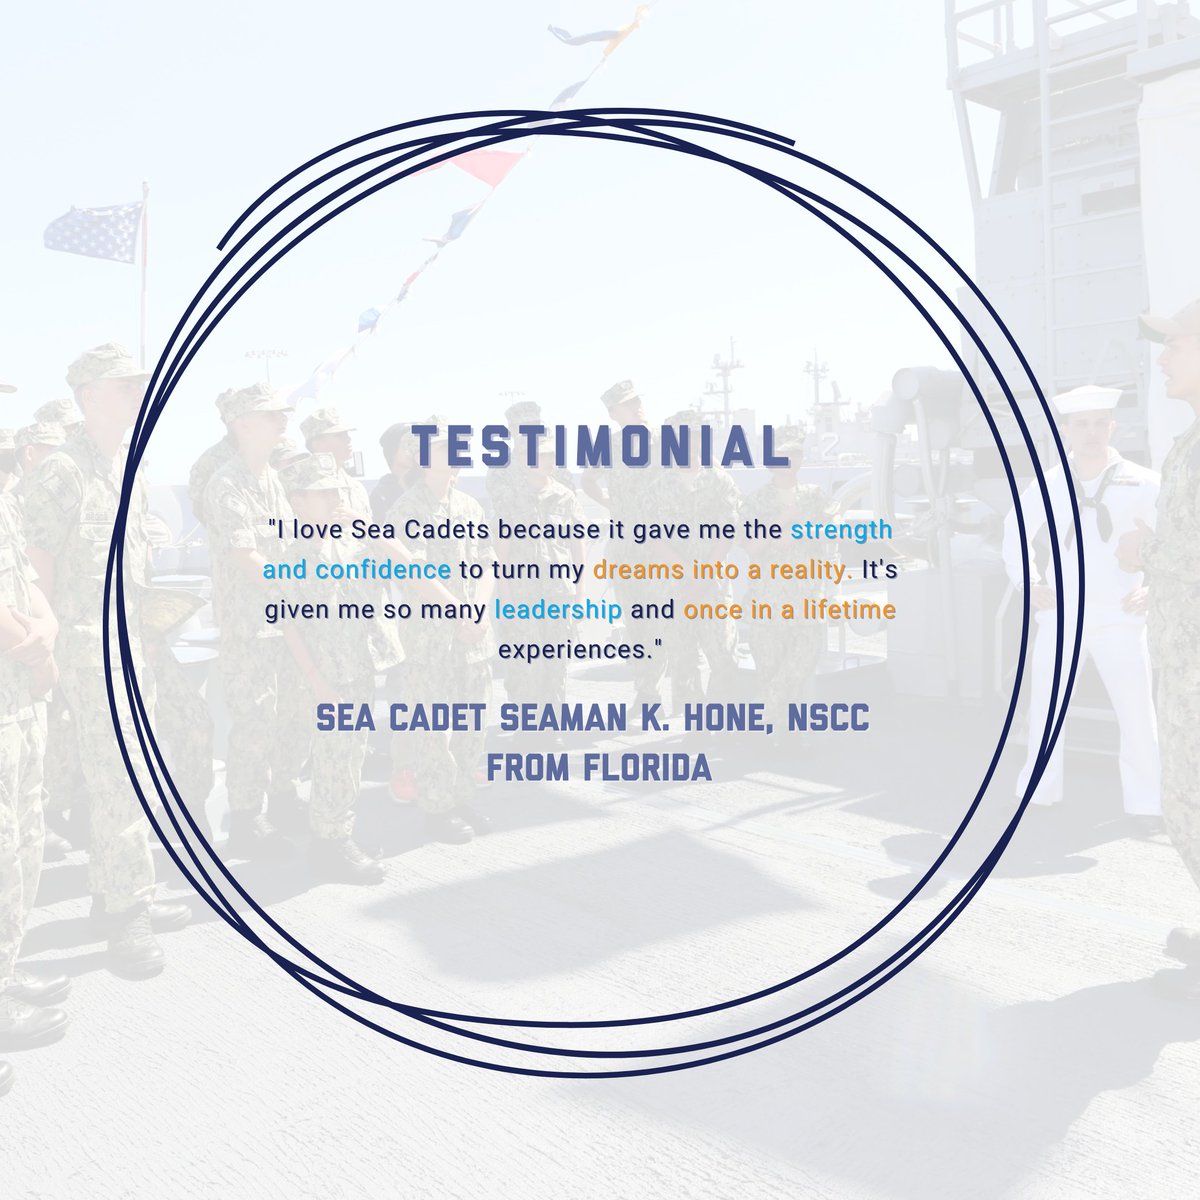 This week we're featuring testimonials from our cadets about our youth program! • What is your favorite leadership lesson you've learned from being in Sea Cadets?